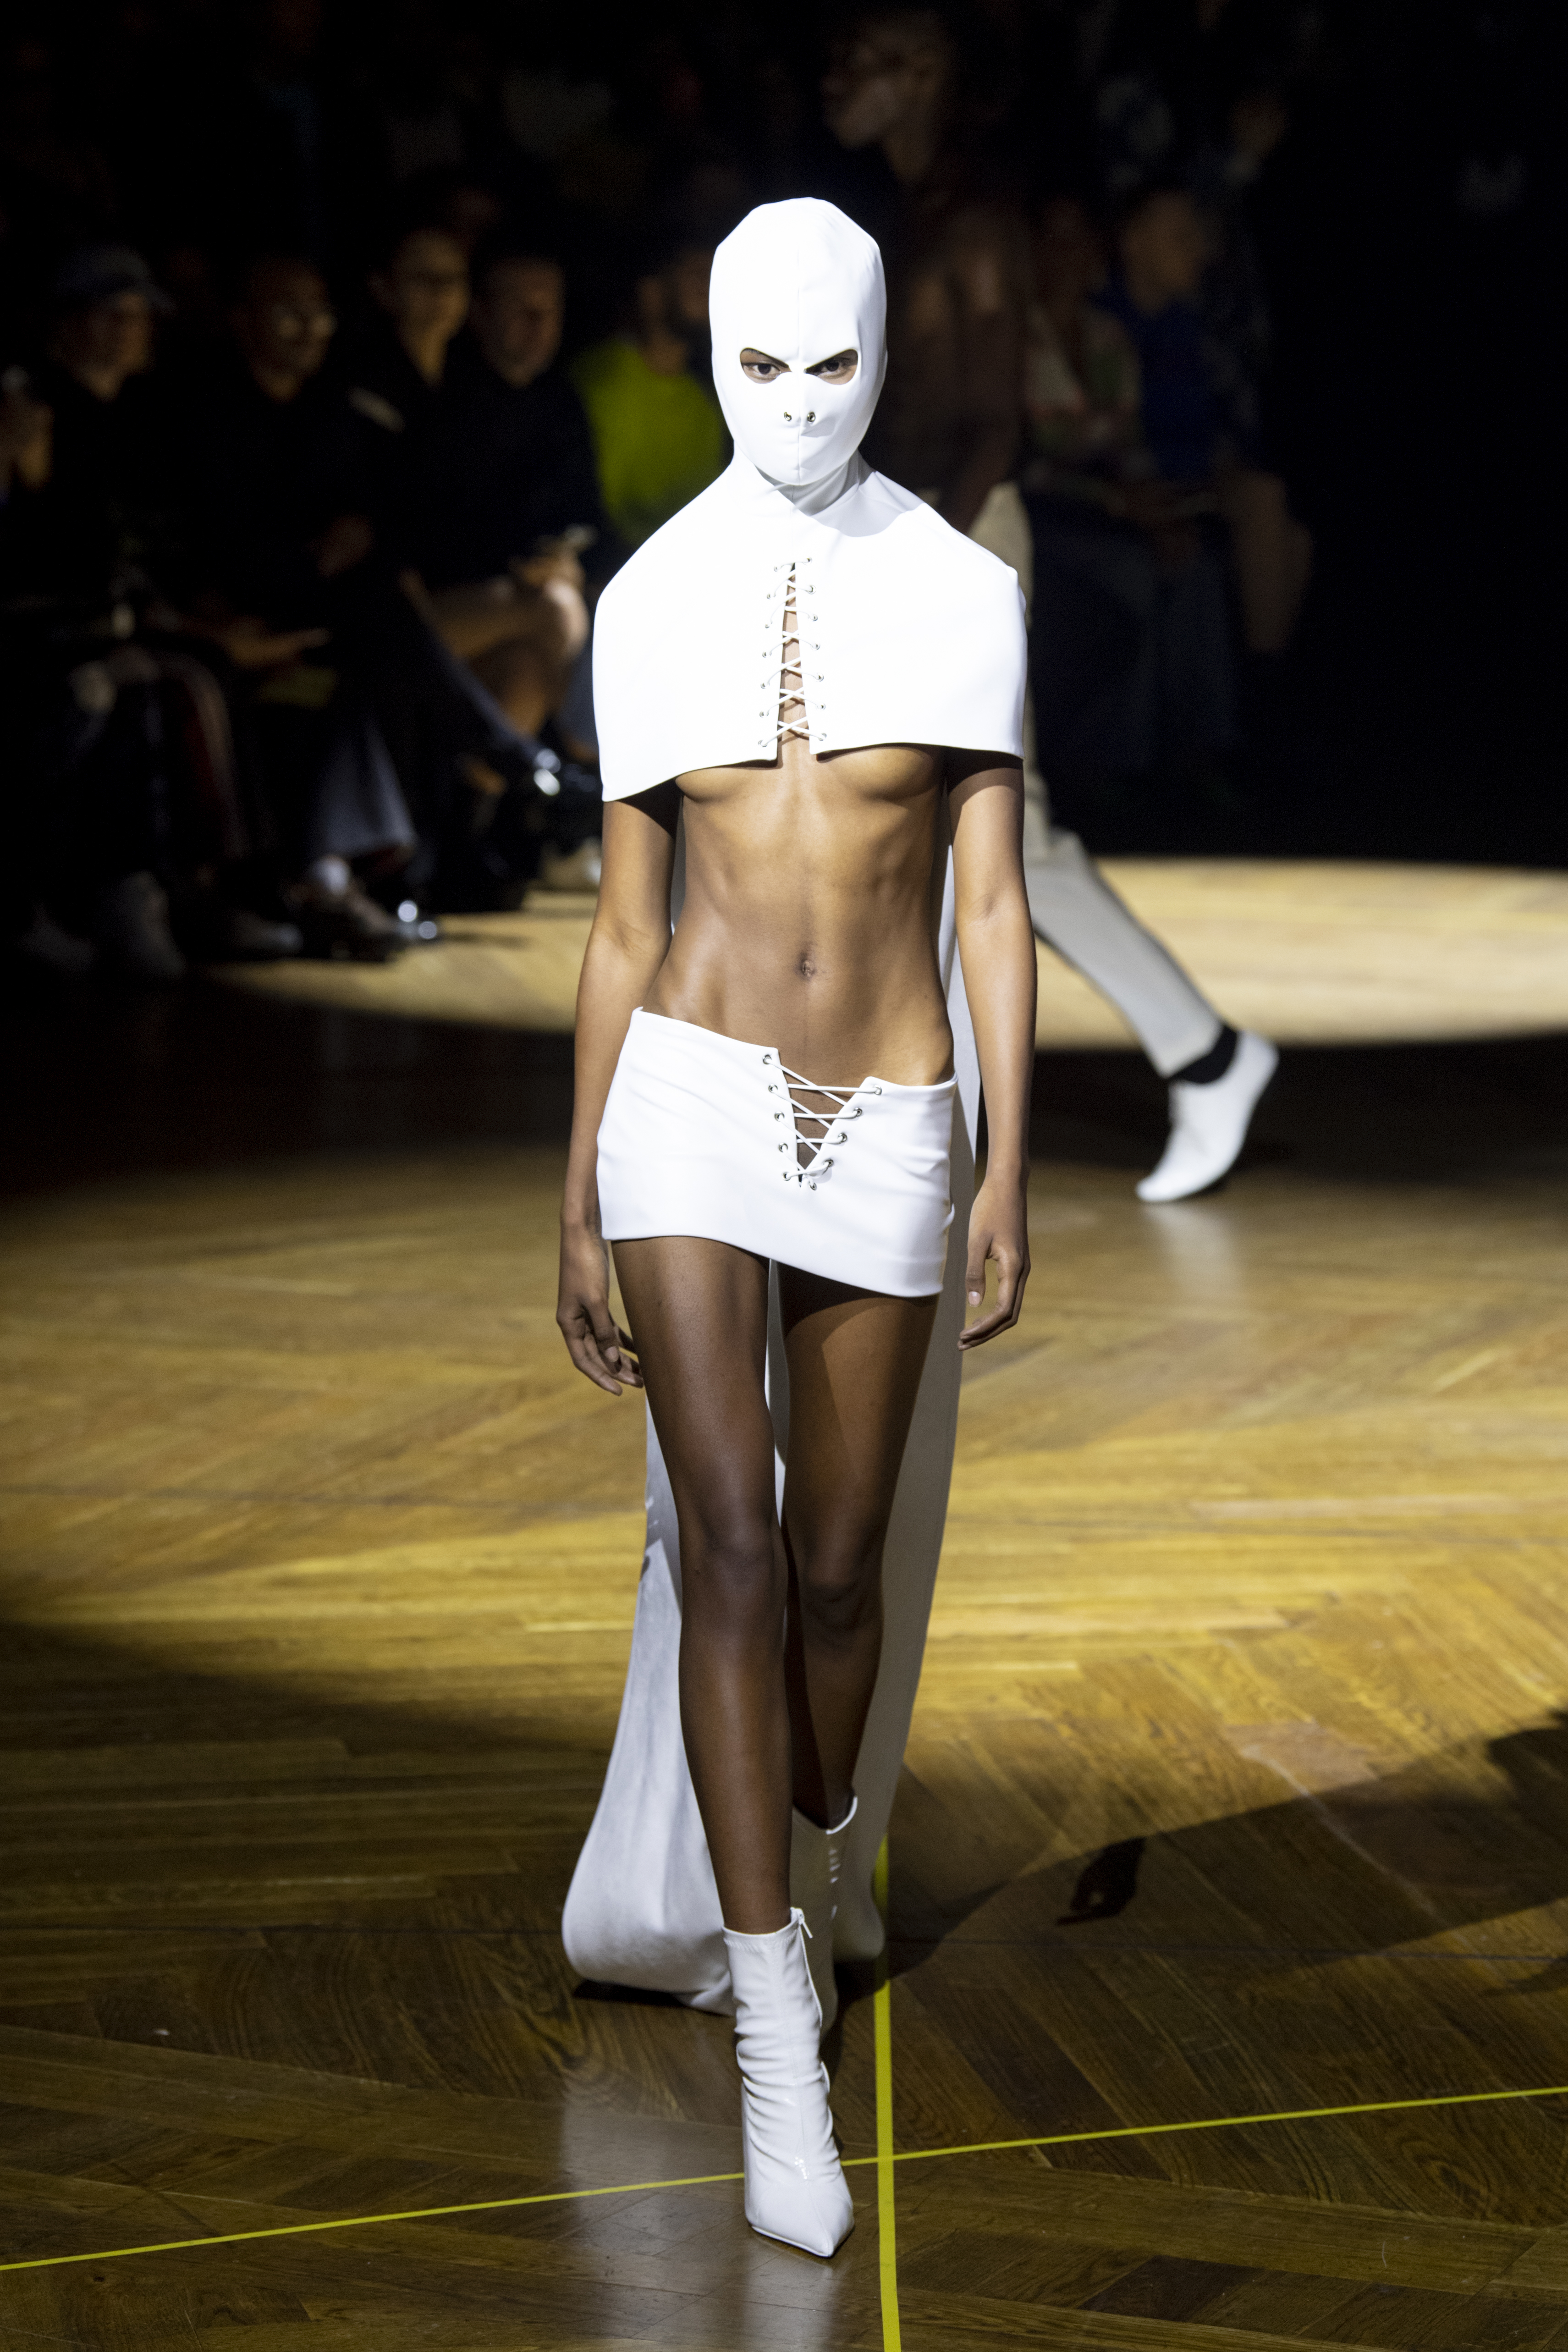 Model on runway in white avant-garde outfit with face fully covered by mask